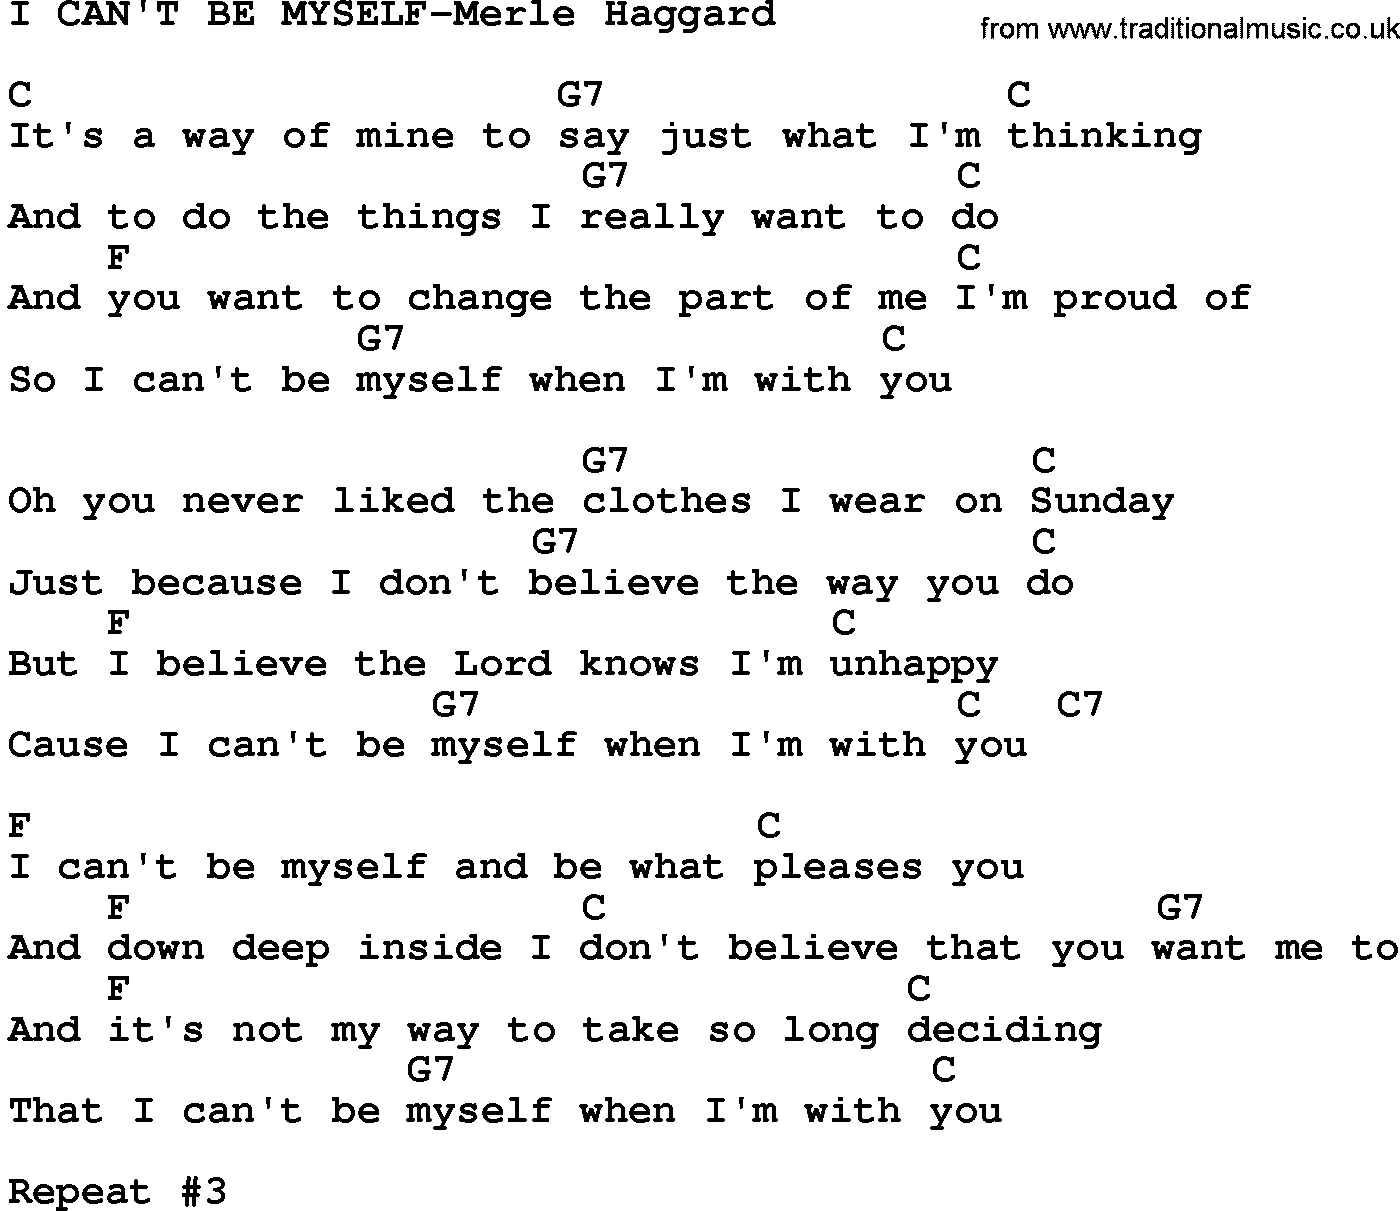 Country music song: I Can't Be Myself-Merle Haggard lyrics and chords